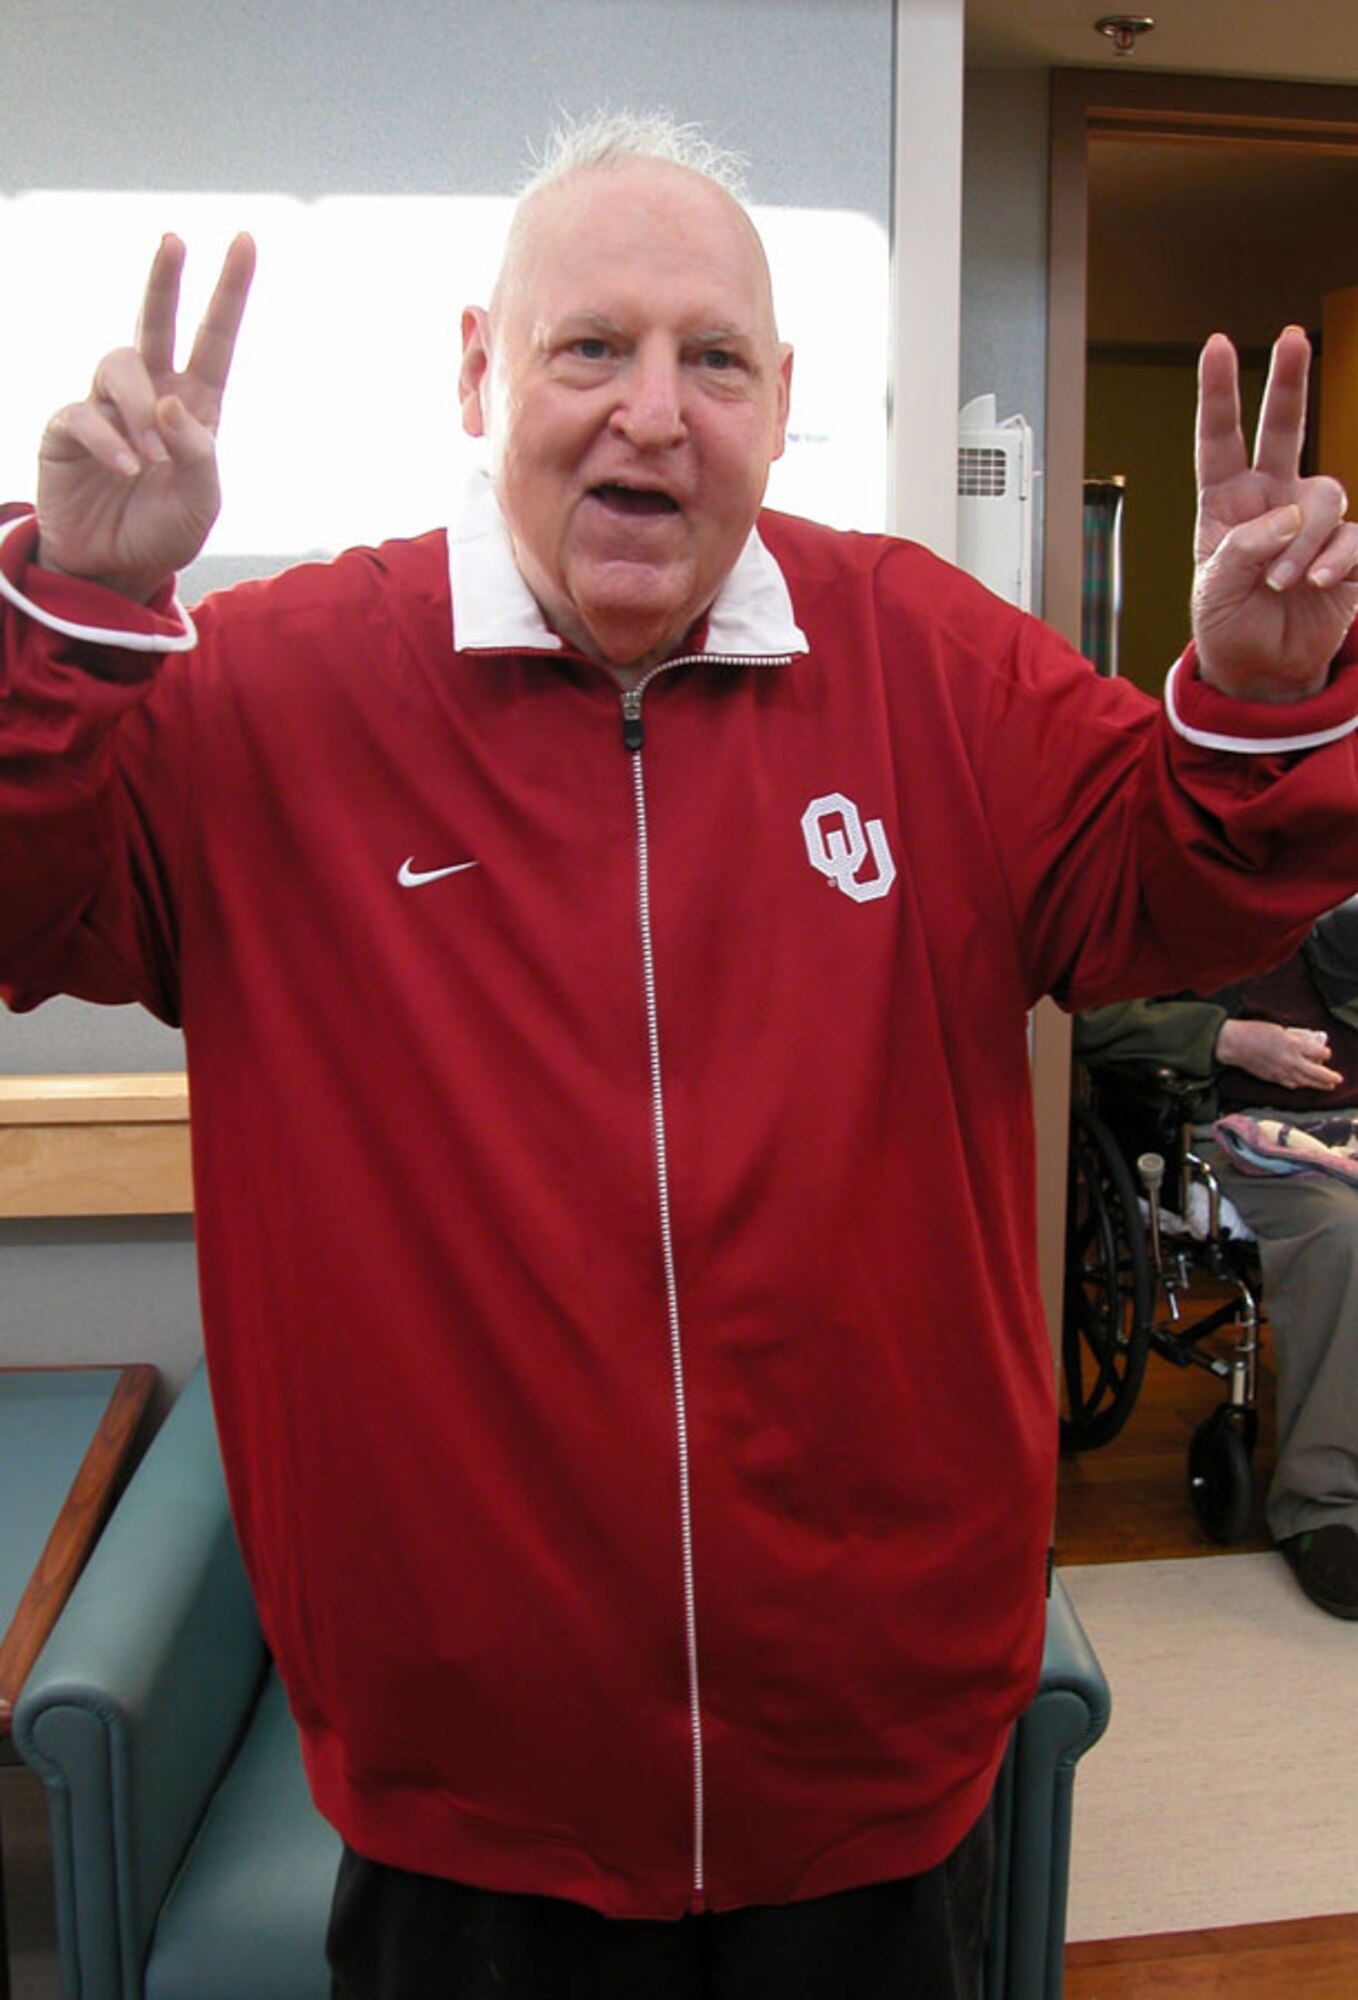 Bill C., a Norman Veteran Center resident and former Navy man, shows his Sooner spirit after trying on his special Christmas gift.  Some gifts are hard to find but this one was donated by Oklahoma University's Athletic Department.  Unit members go to great lengths to fill the wishes of the veterans.